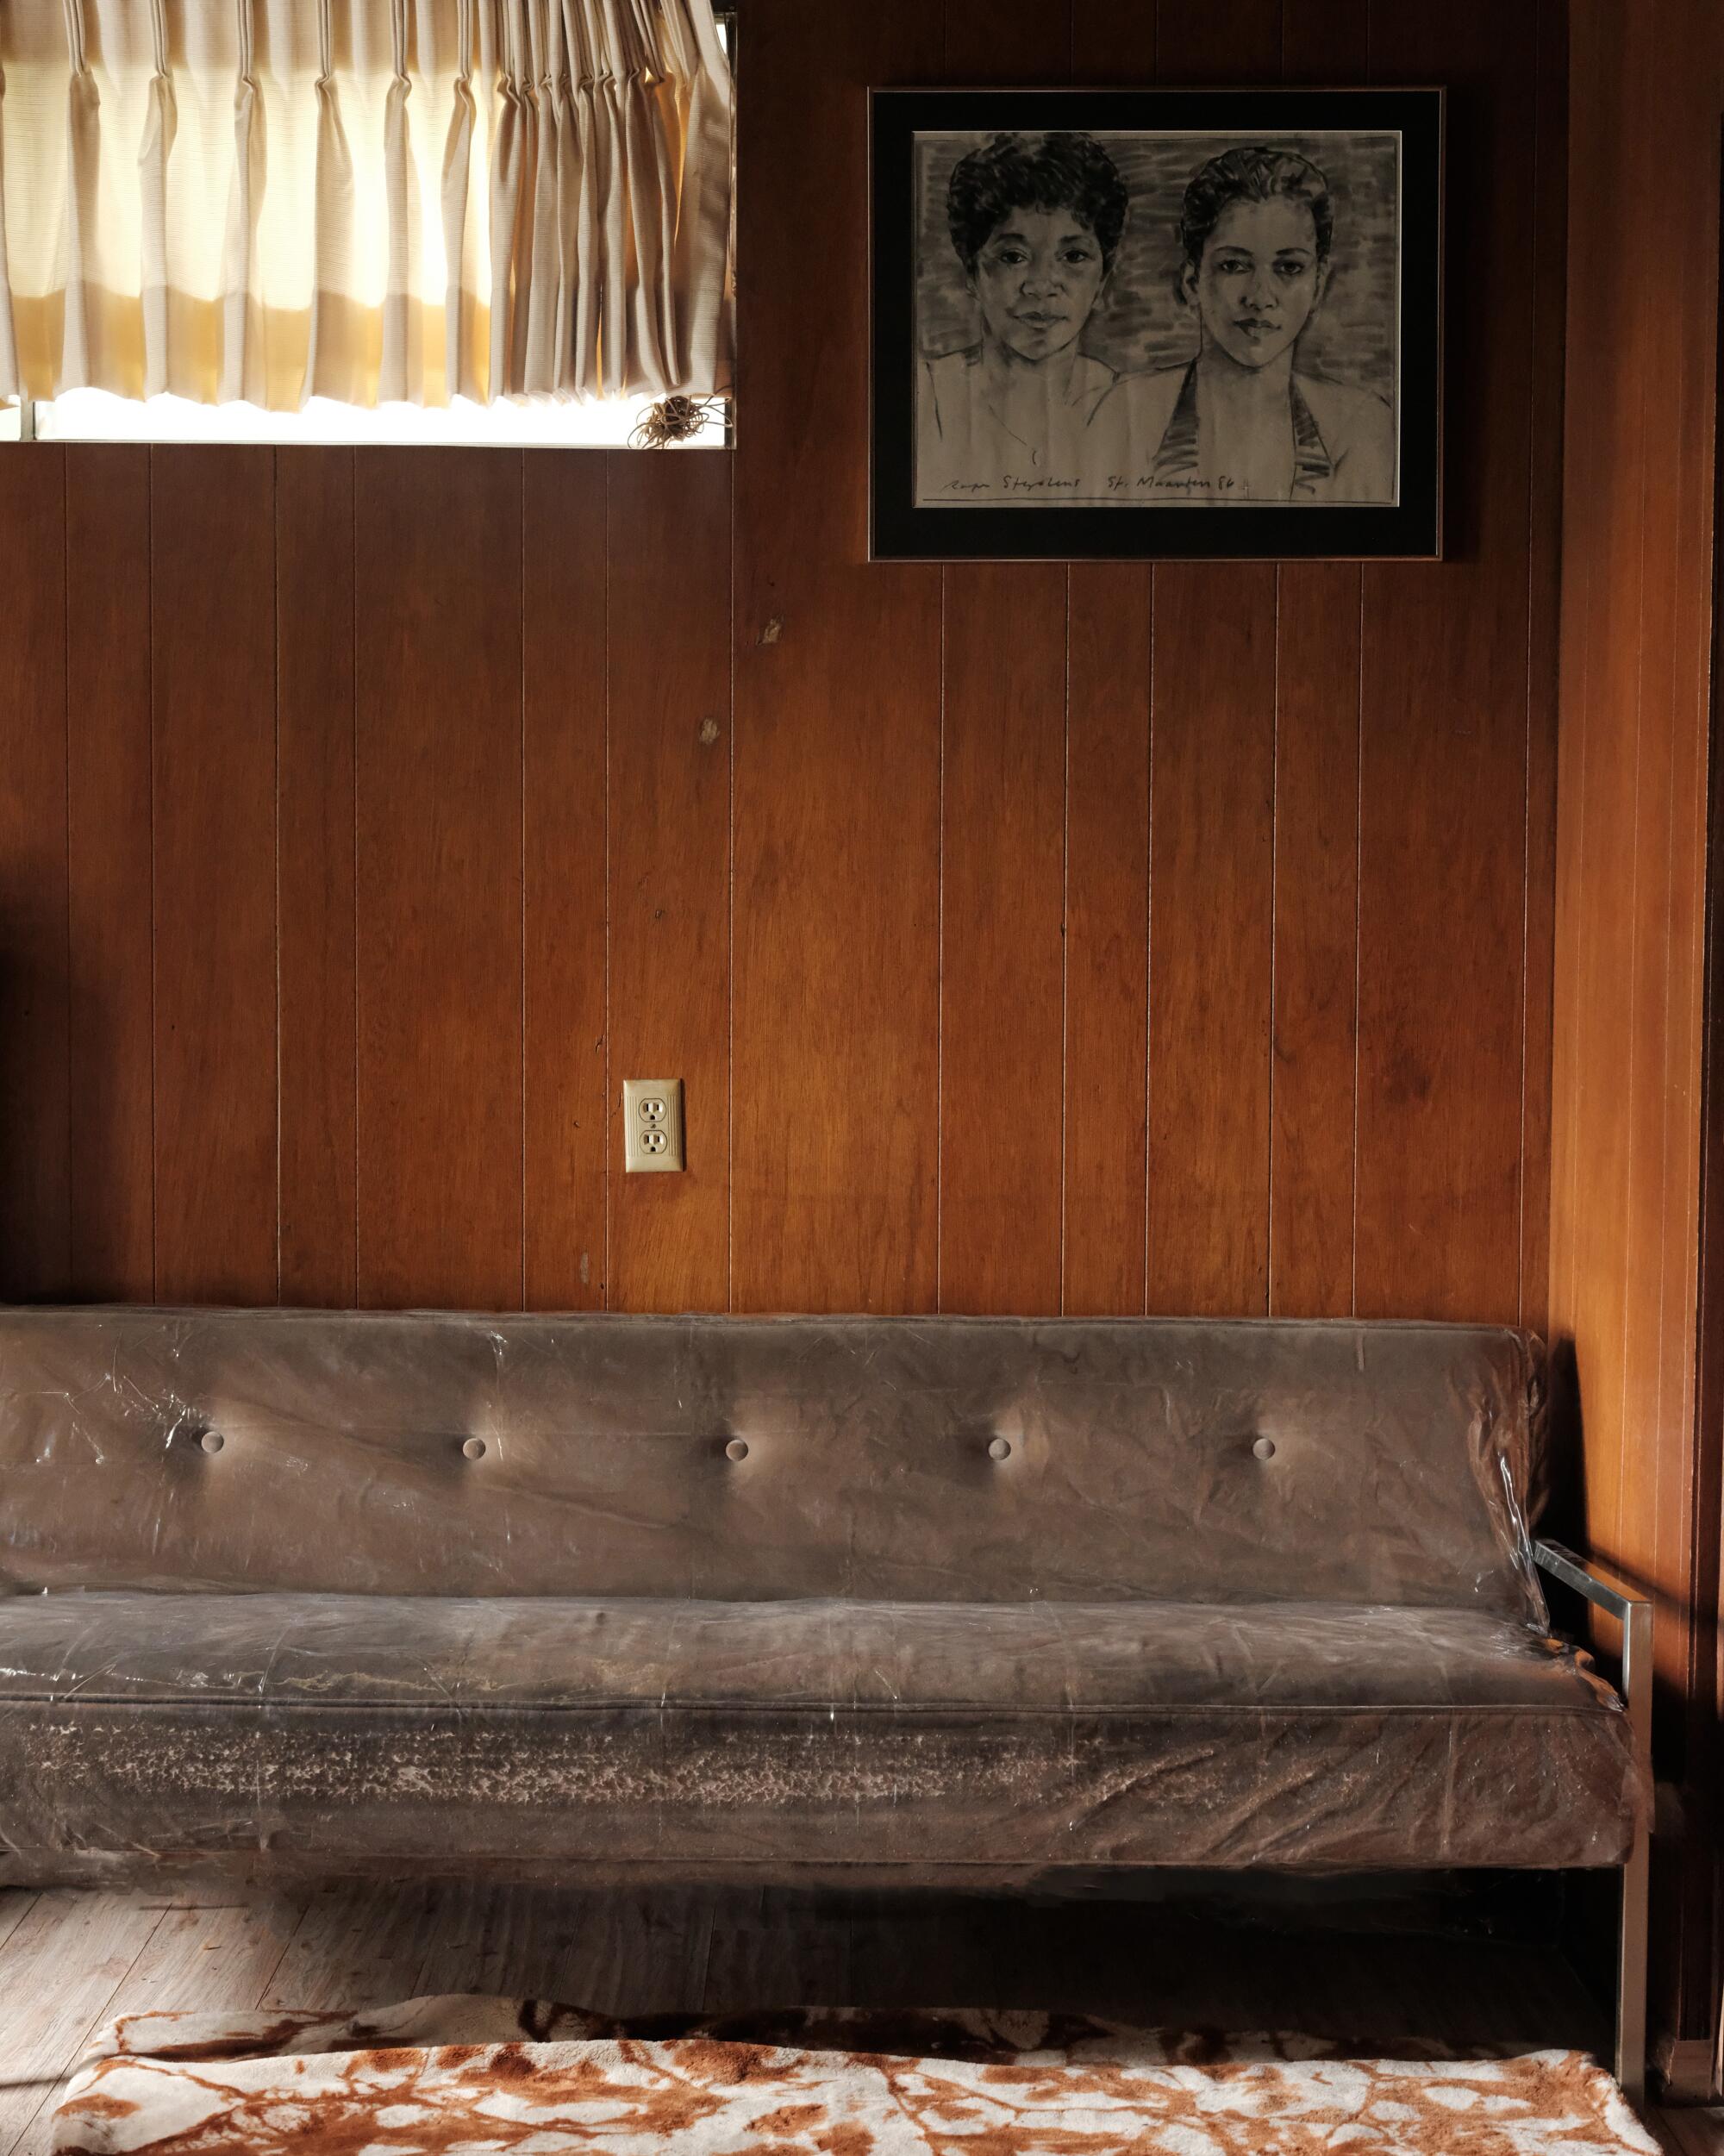 A photo of a brown plastic-covered couch, a portrait of two women hanging above it.